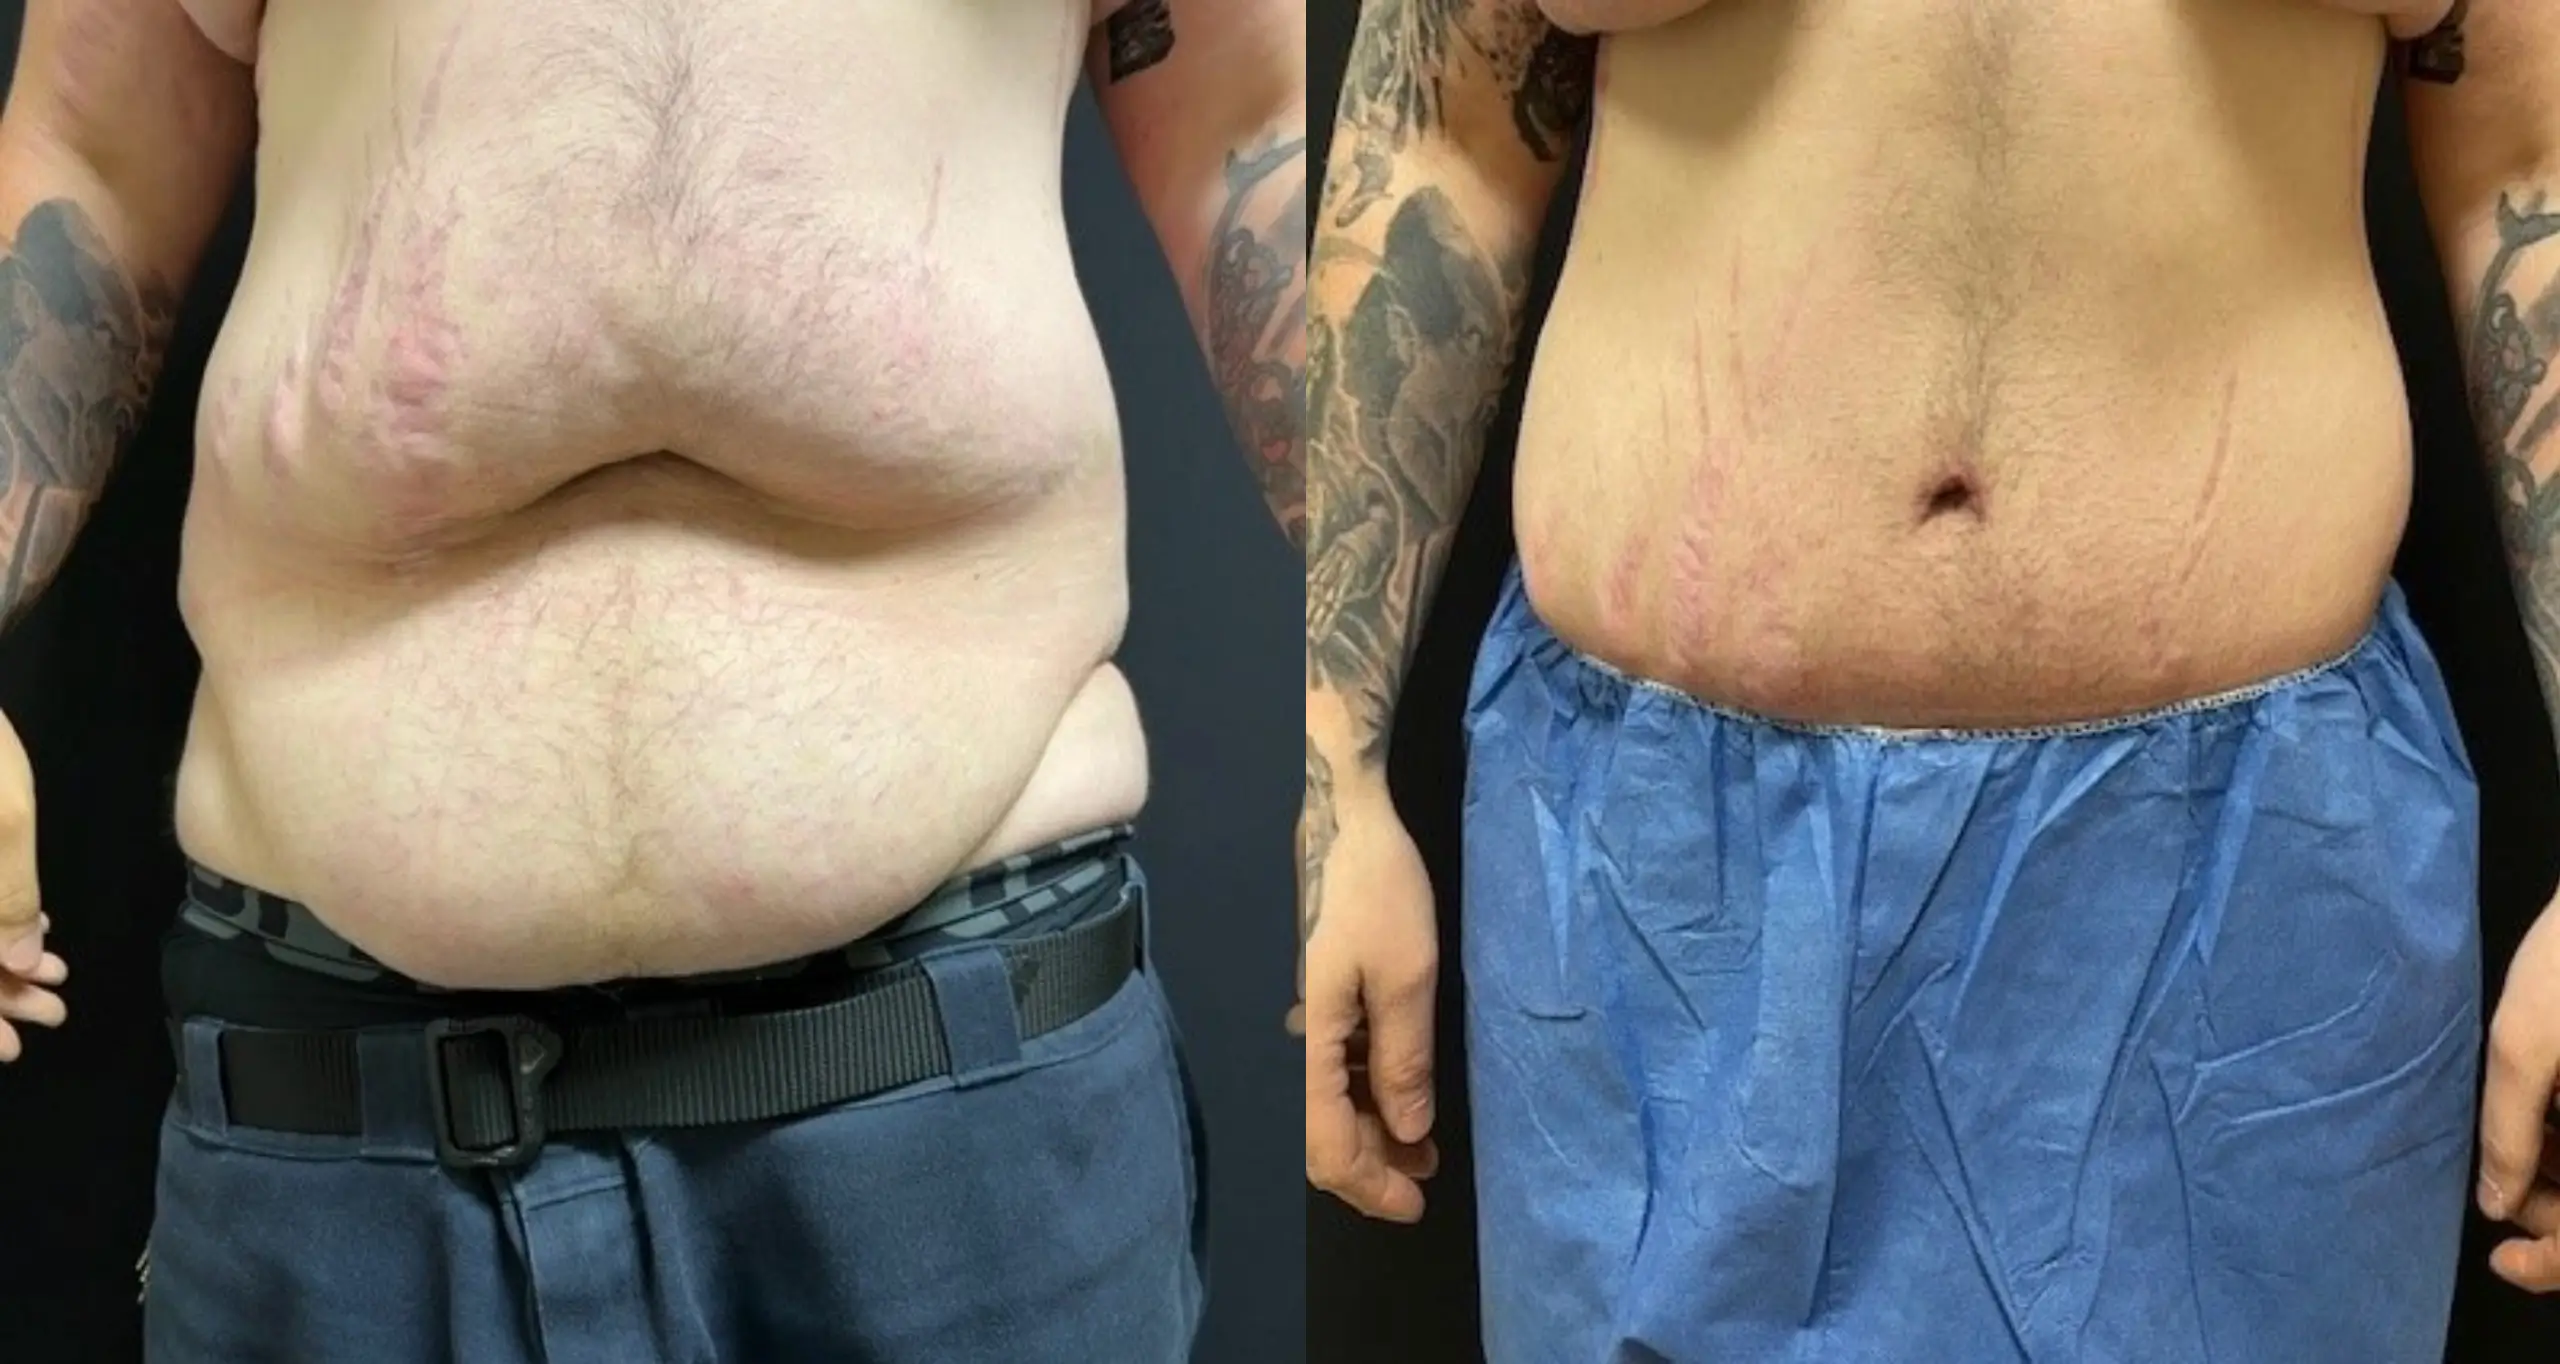 Tummy tuck patient before & after results.